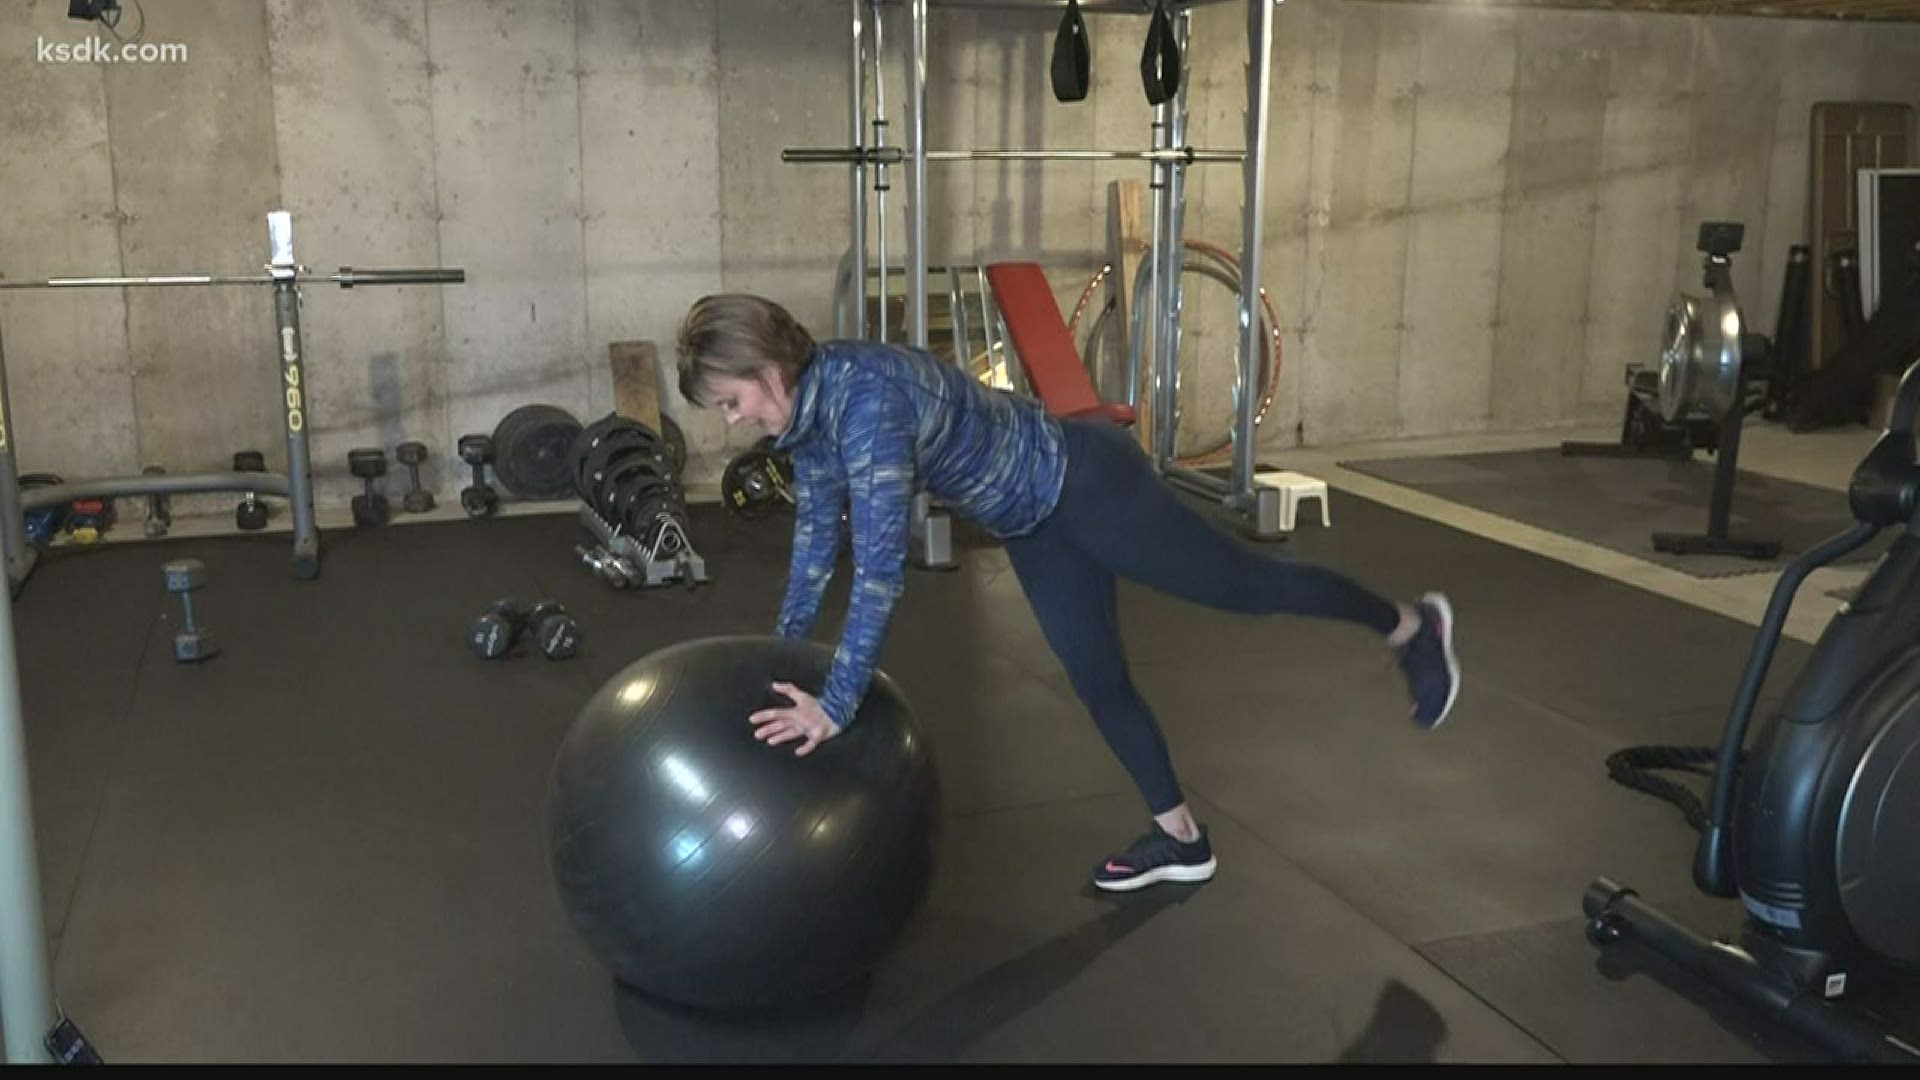 Here's how to work out at home using an exercise ball